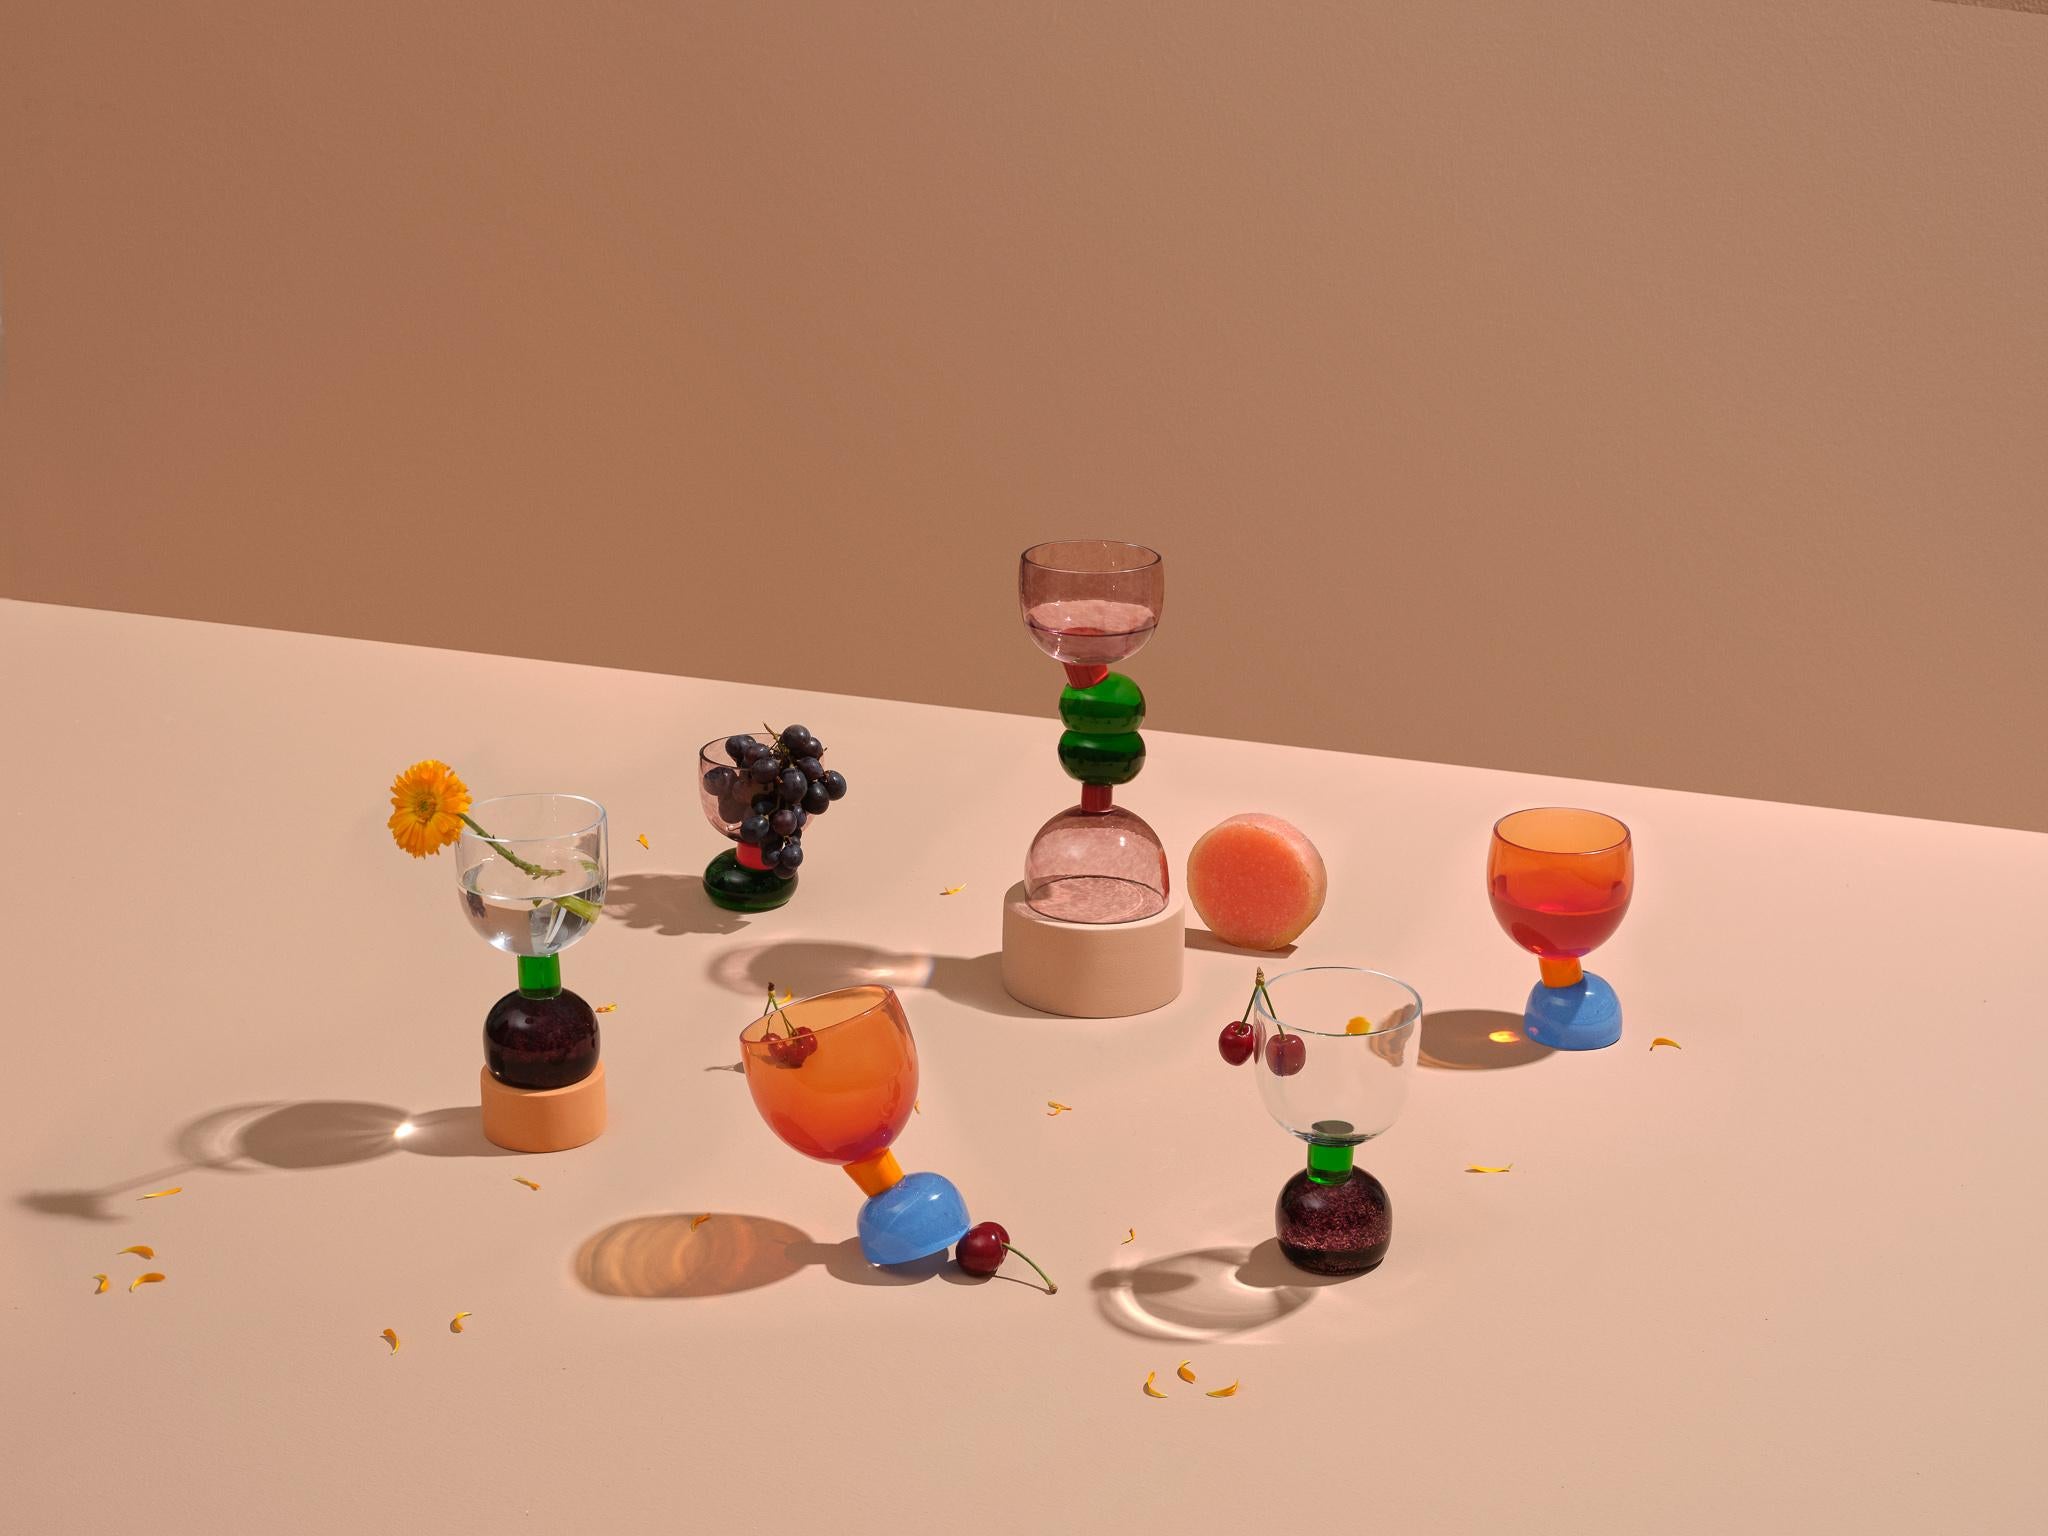 This sculptural drink-ware set is colorful, naive and it will decorate our tables while also being functional.
The glassware reflects the designer’s need to surround itself with more colorful materials and shapes and work with therapeutic methods